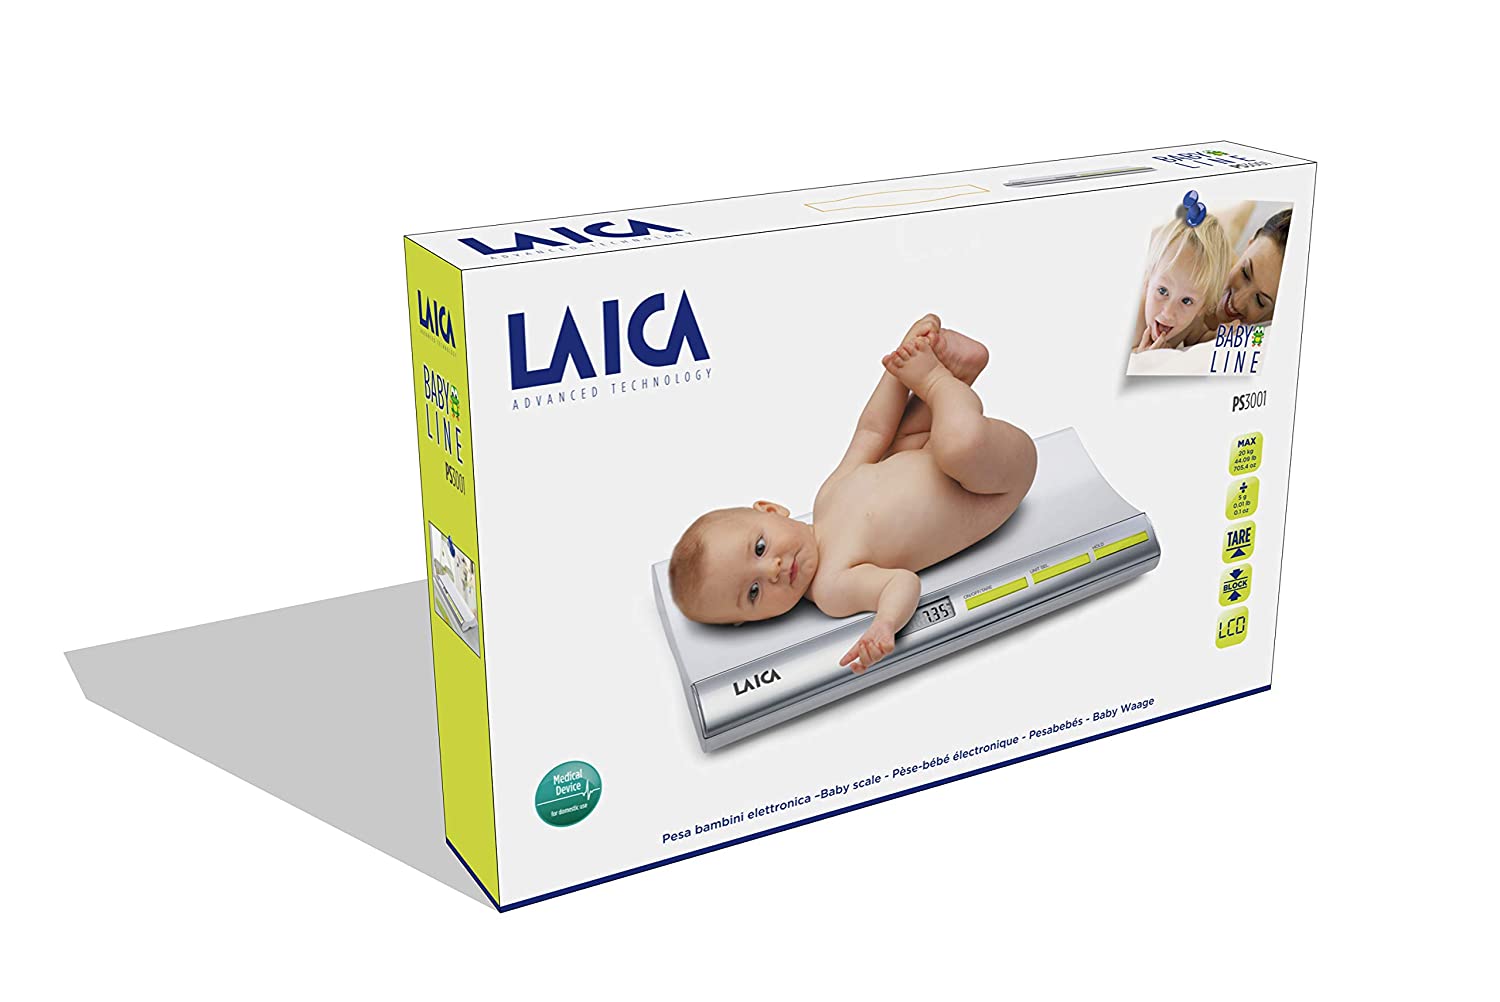 Laica PS3001 Babywaage, Farbe weiß